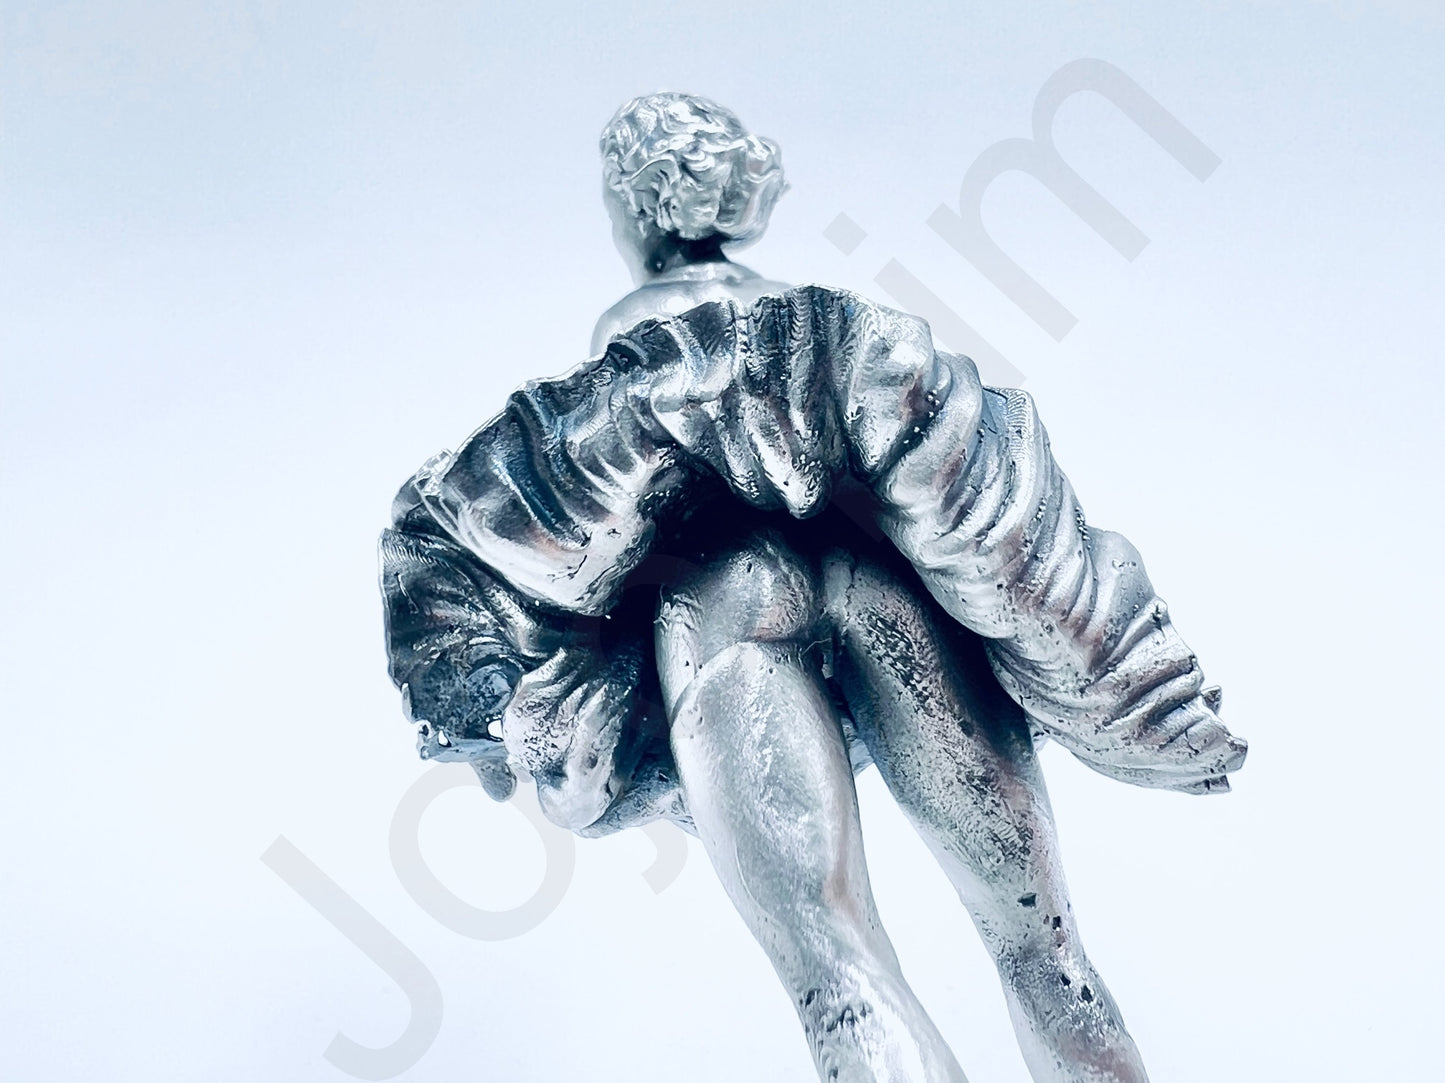 "Marilyn Monroe" .999+ Silver Statue, Hand Poured, Investment Casting, Custom Made [LIMITED MINTAGE: 100]